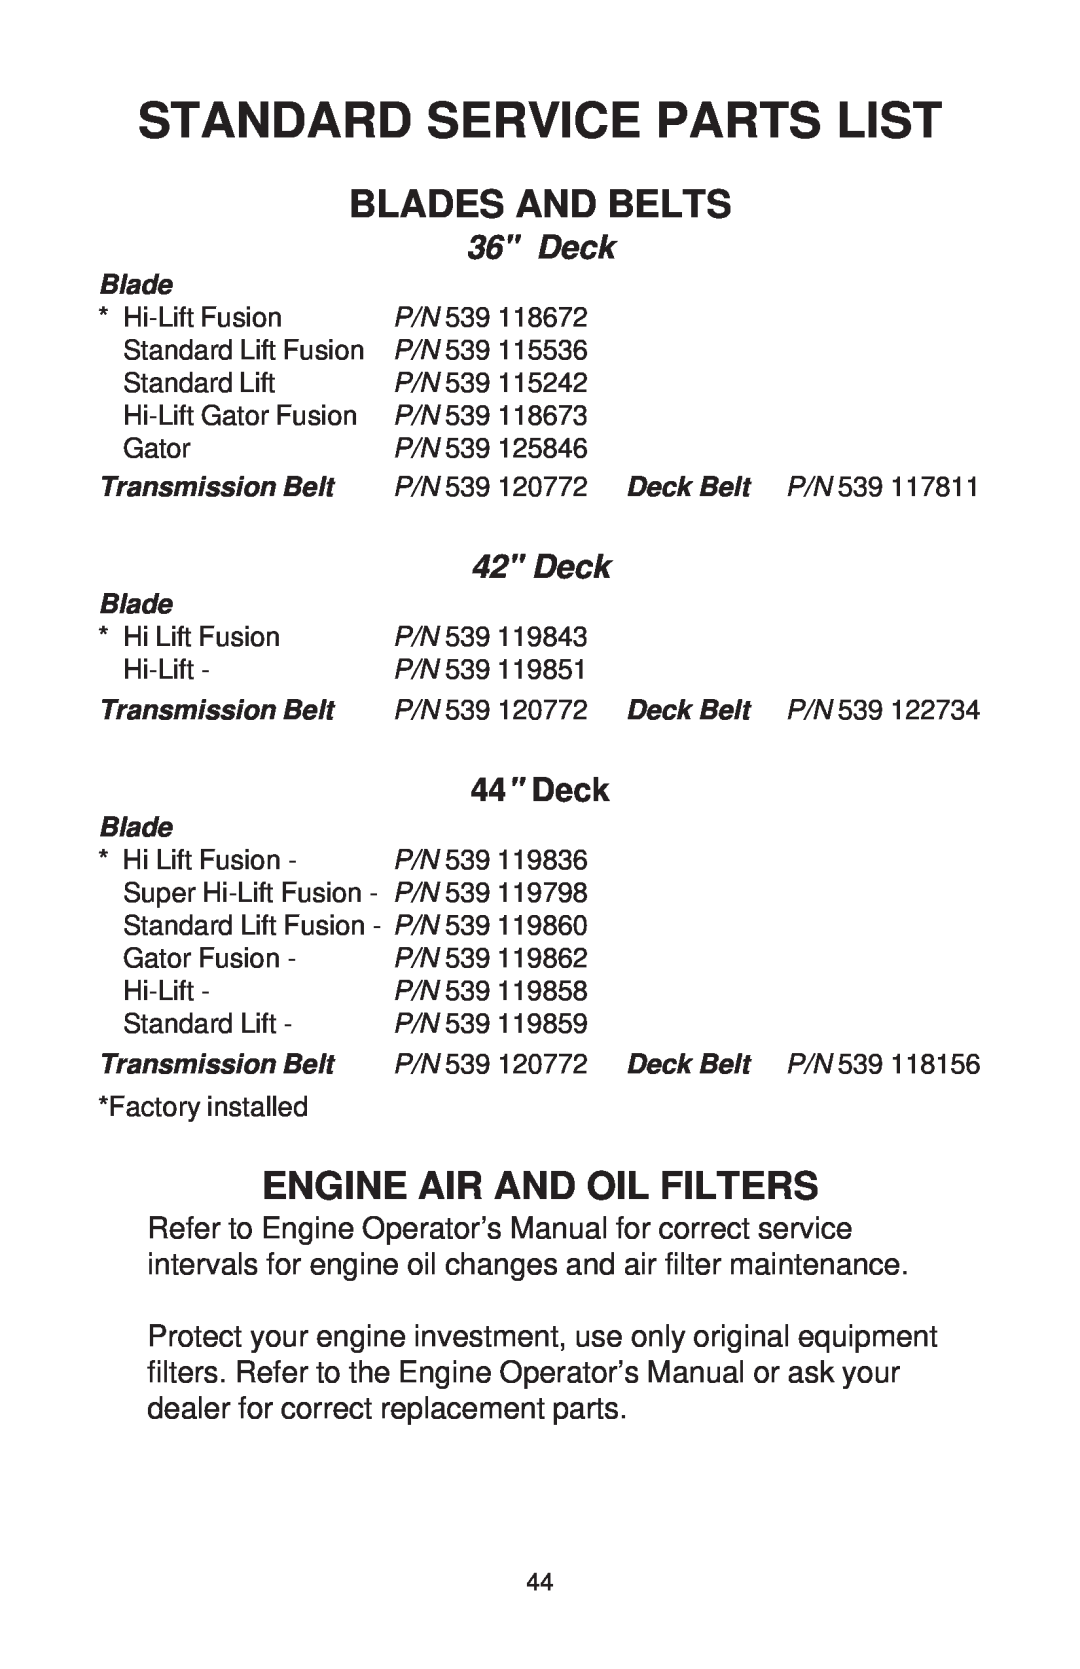 Dixon ZTR 44/968999538 manual Standard Service Parts List, Blades And Belts, Engine Air And Oil Filters, Deck 